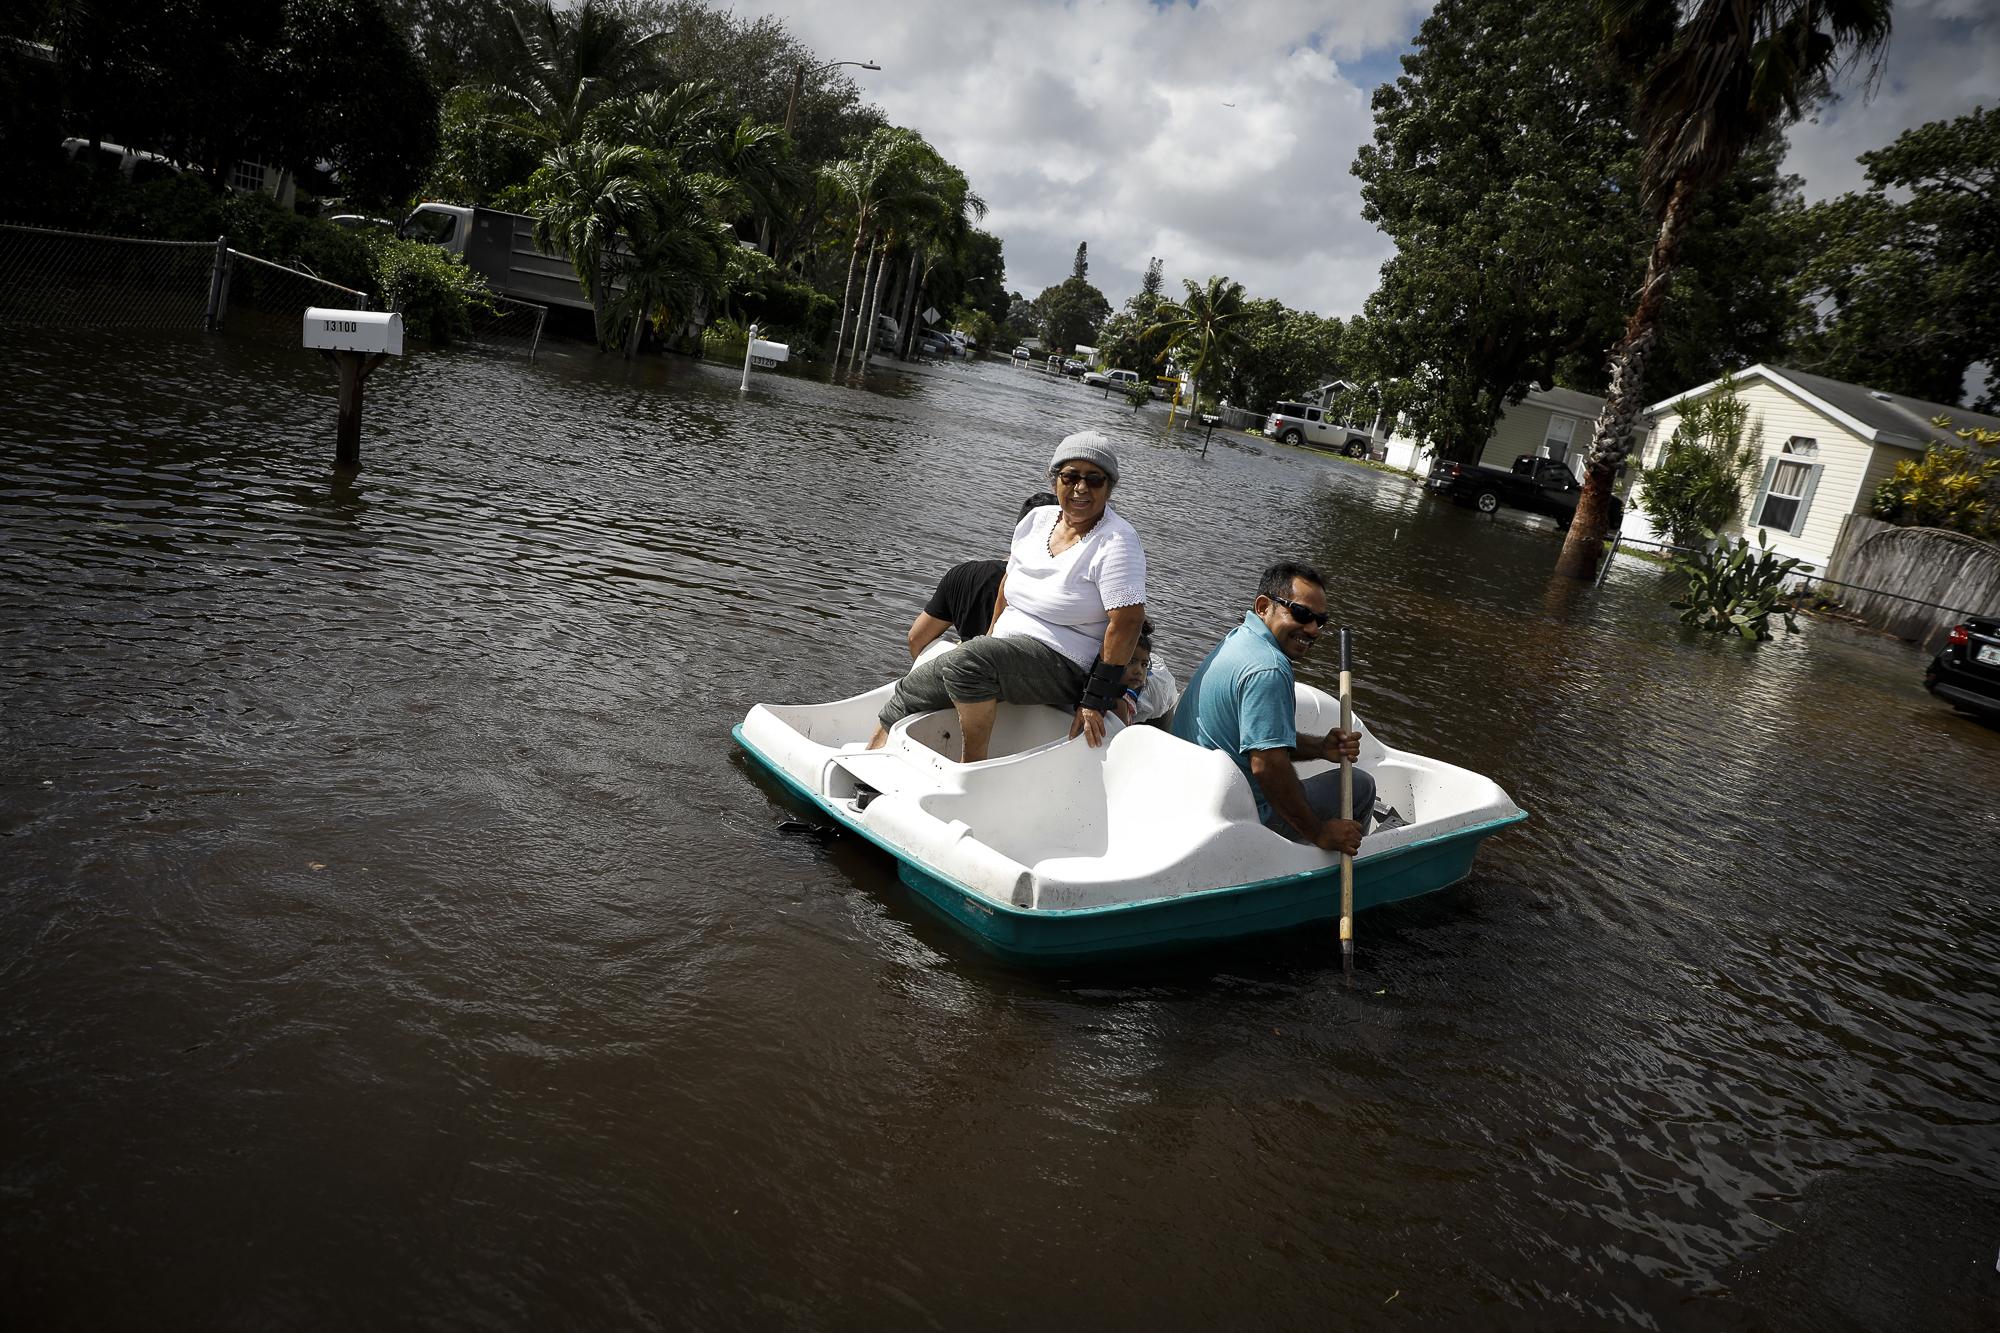 Tropical Storm Eta drenches South Florida - People row a boat in floodwaters caused by Storm Eta in...